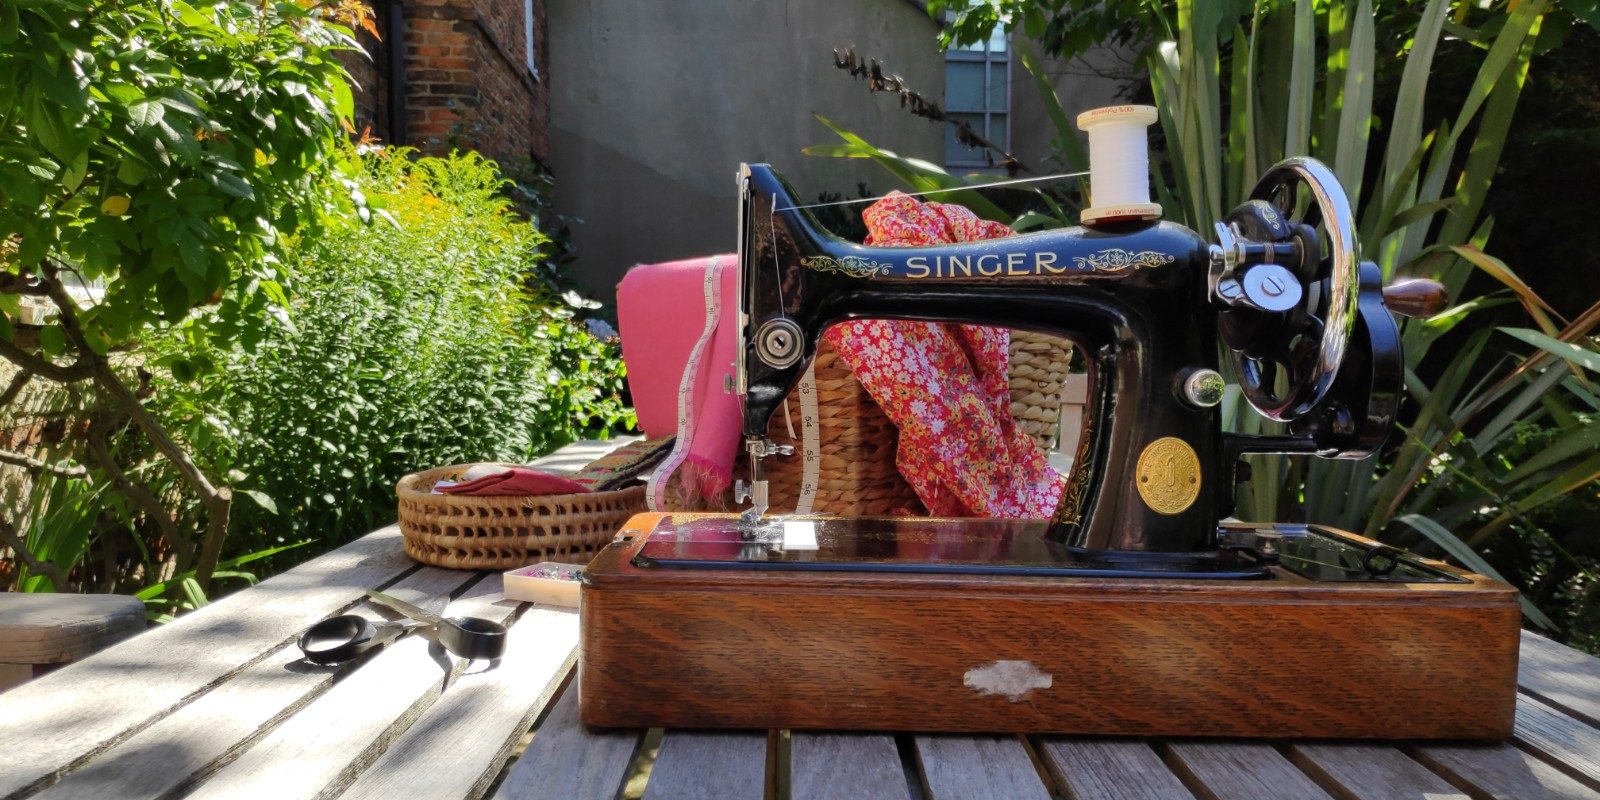 An antique sewing machine, scissors and fabric on a table in a garden symbolising the author's resilience